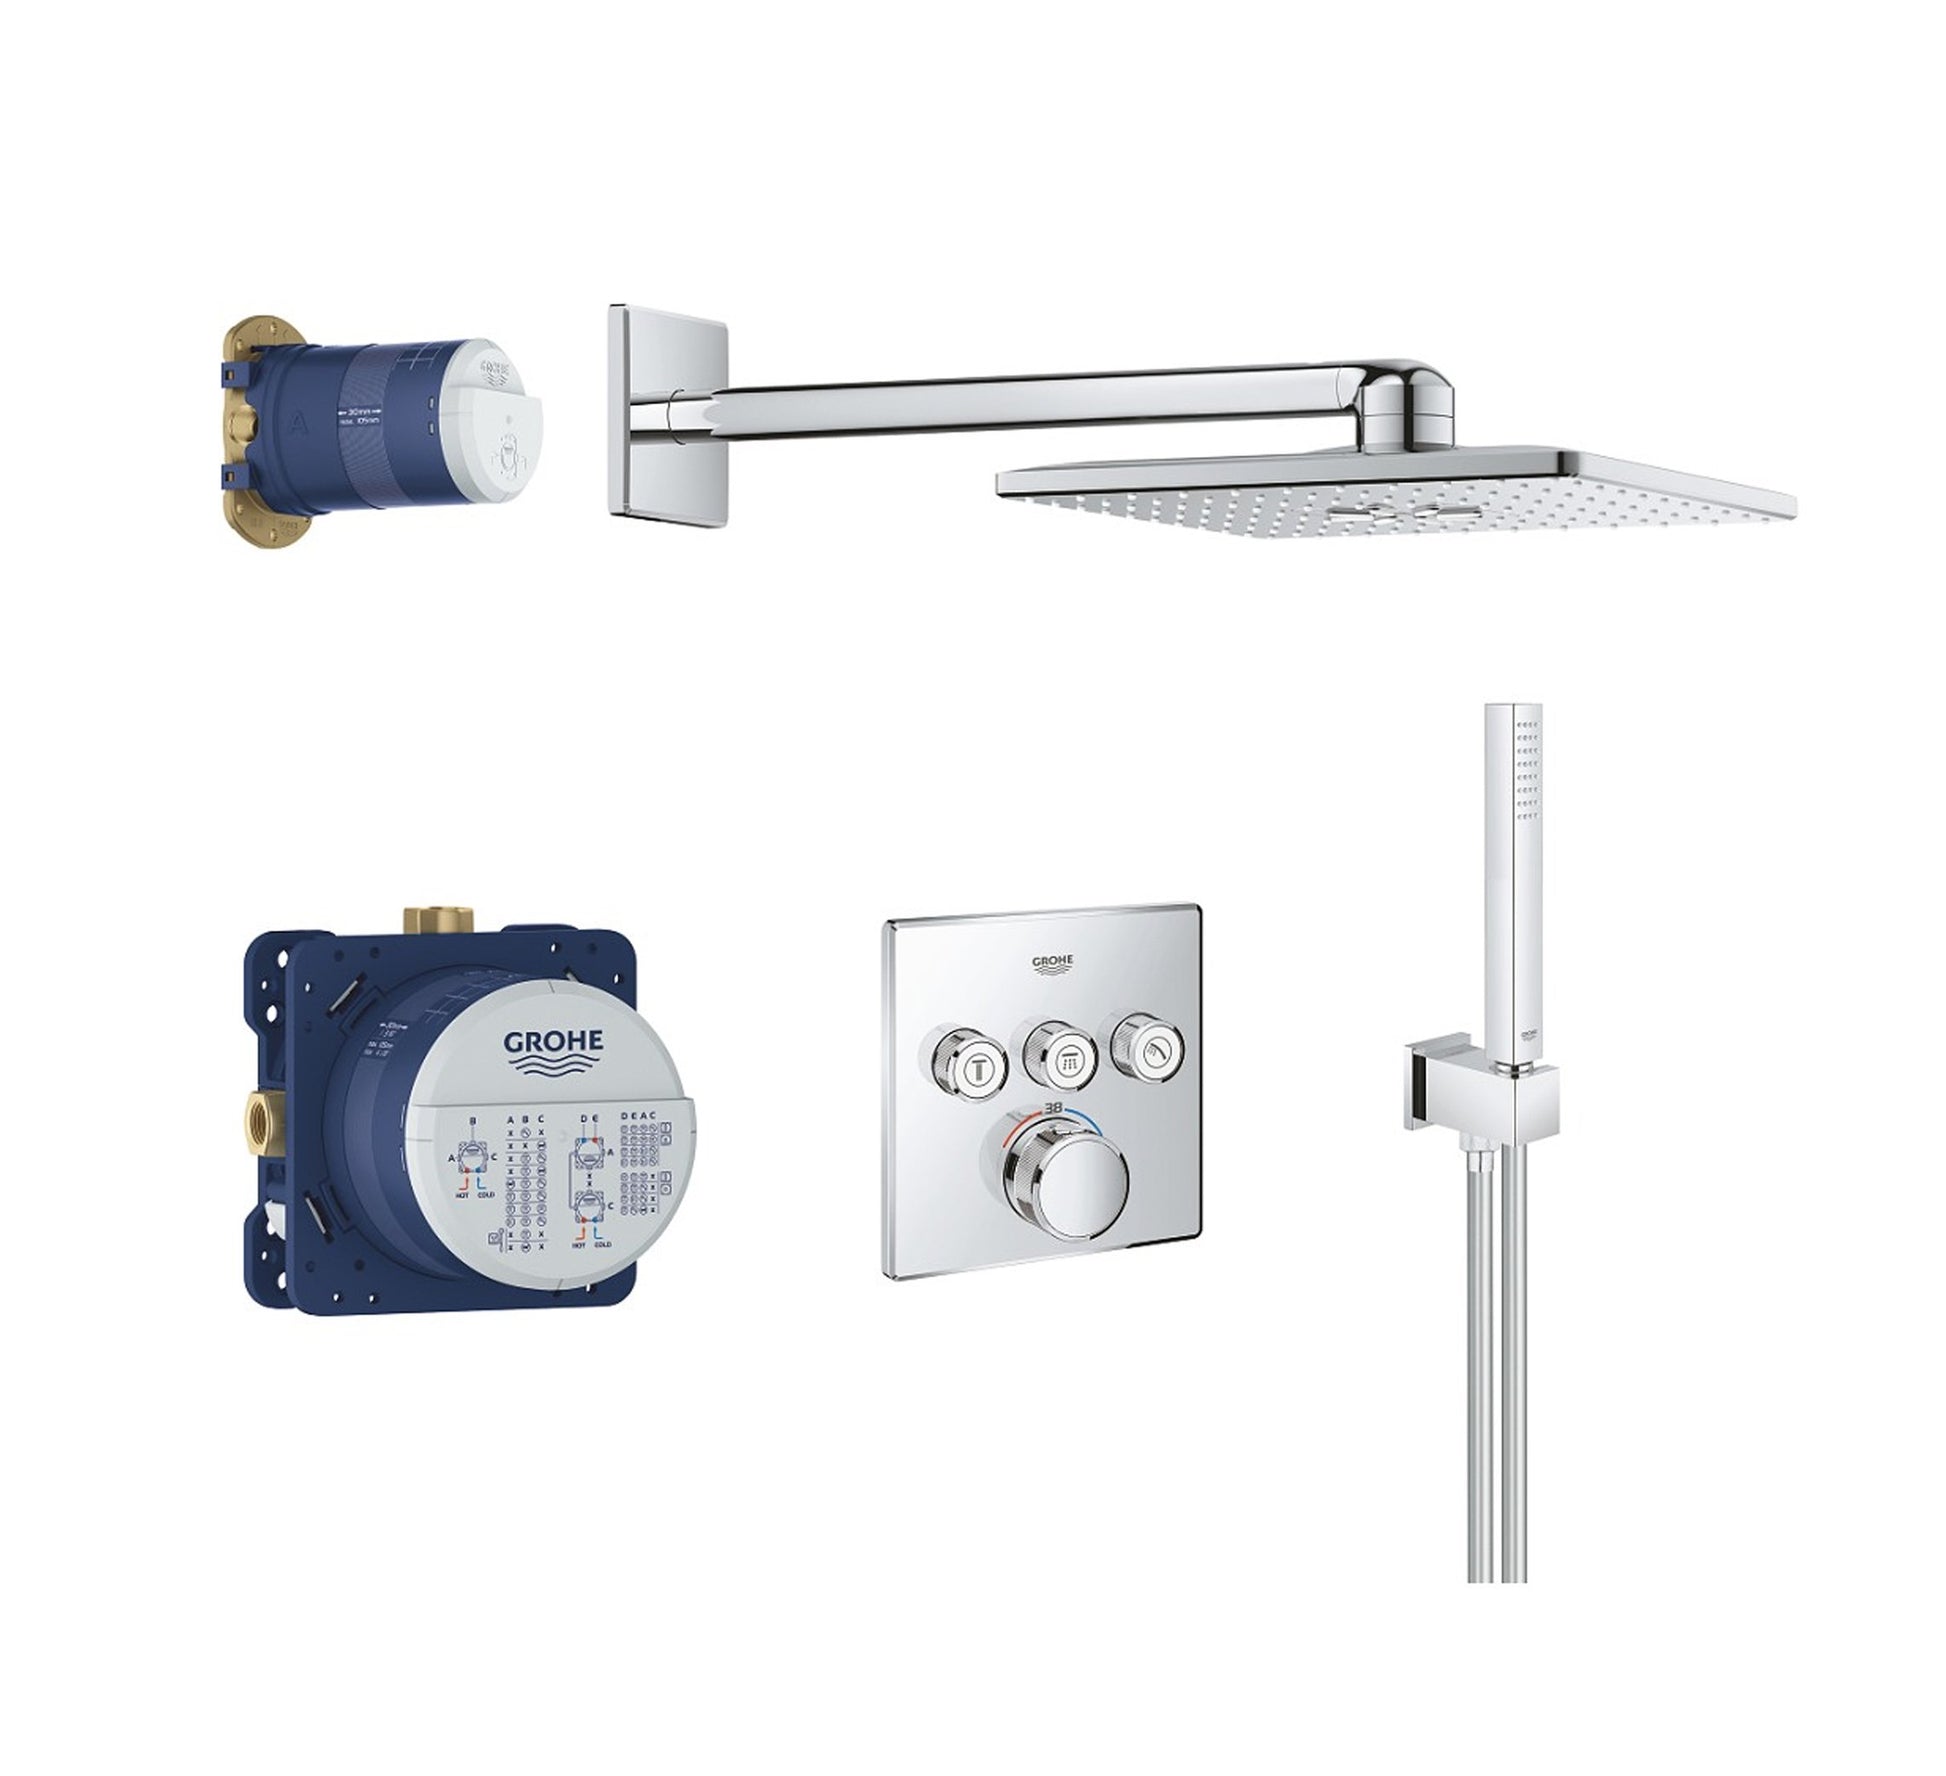 GROHE GROHTHERM SMART CONTROL PERFECT SHOWER SET WITH RAINSHOWER 310 SMART ACTIVE CUBE - 34706000 - Tadmur Trading